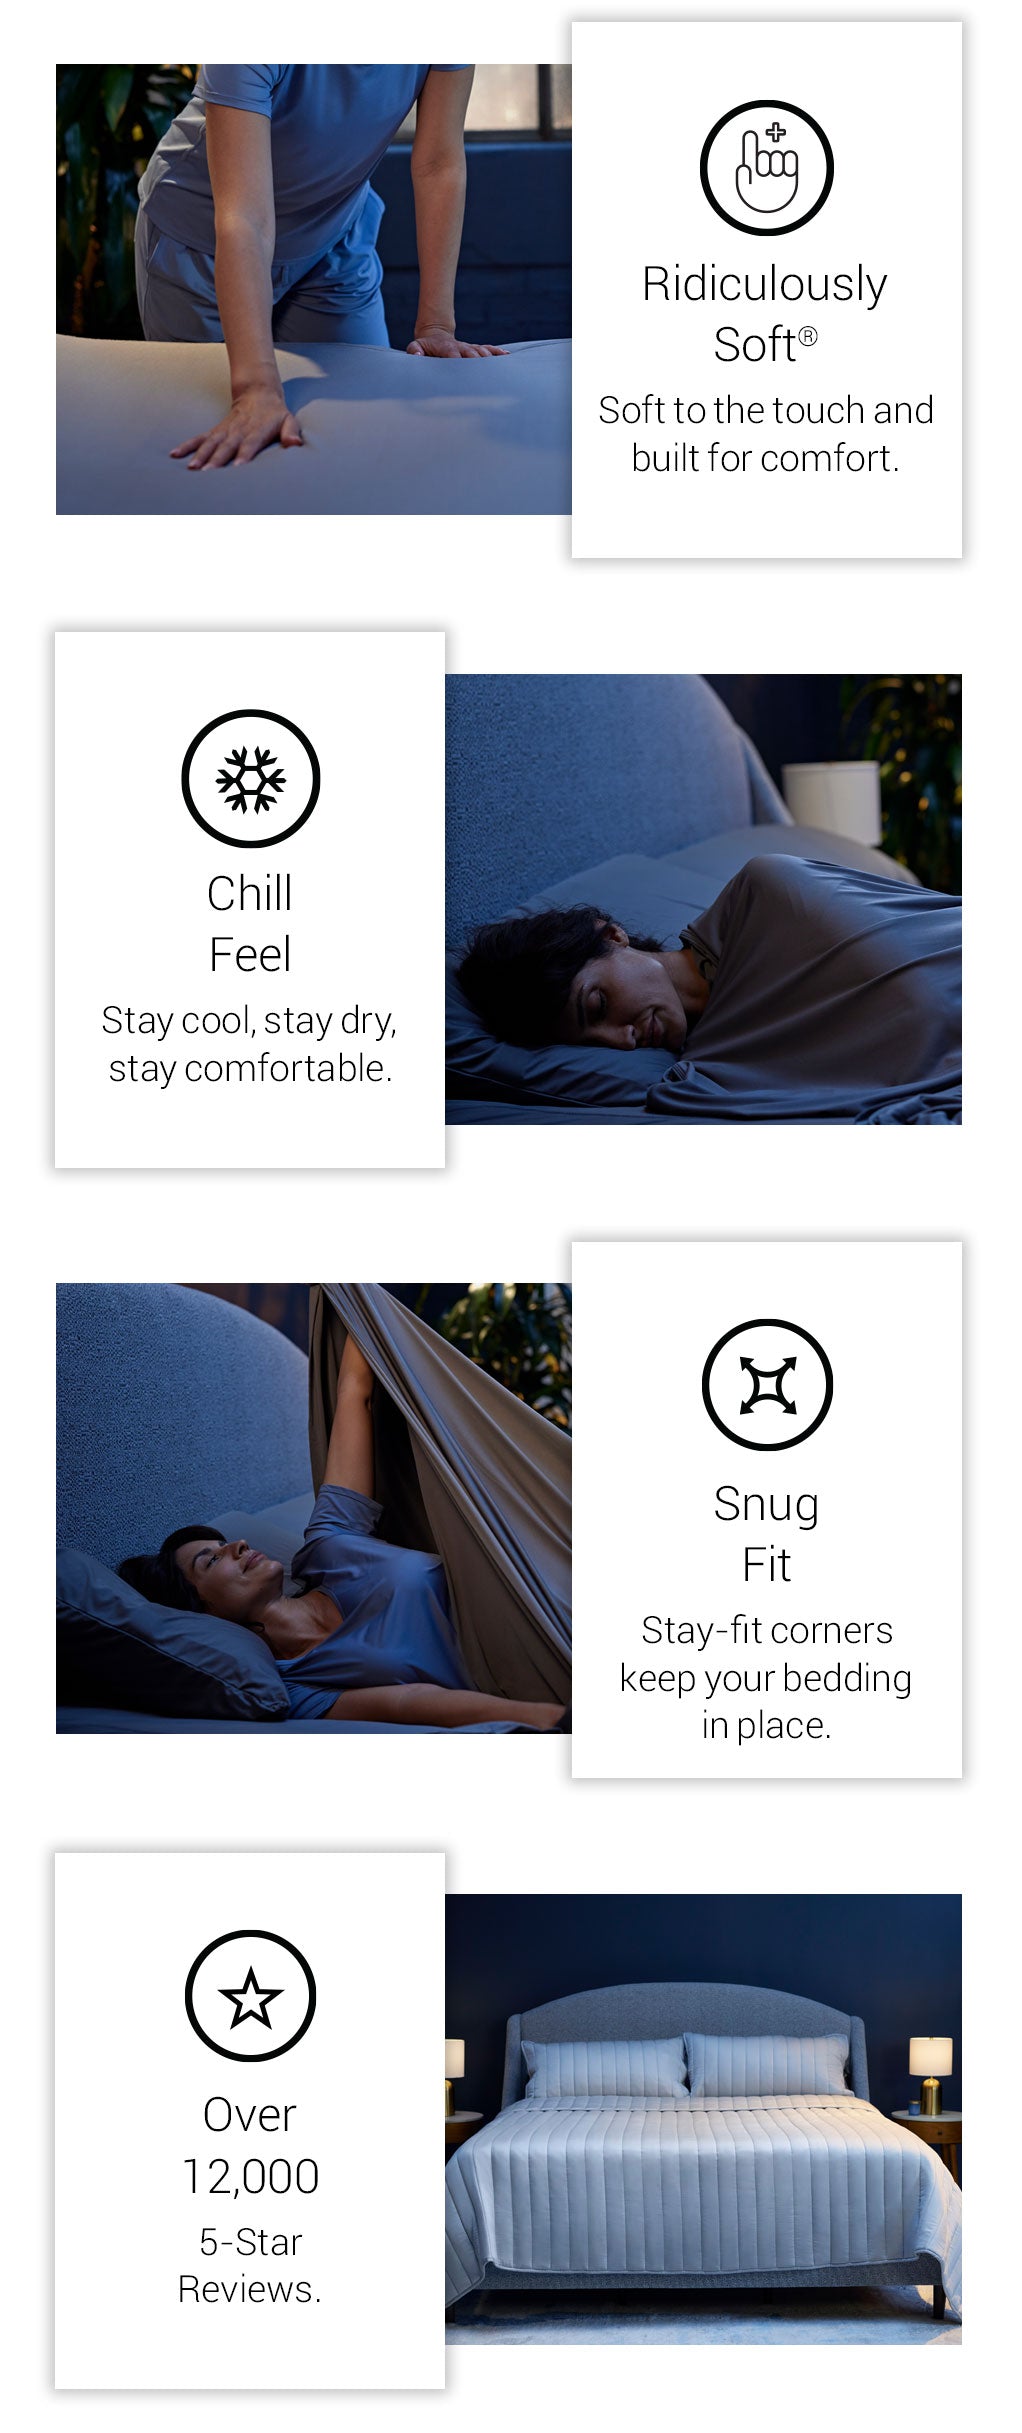 Infographics showing SHEEX are Ridiculously Soft, have a Chill Feel, Snug Fit, and have over 12,000 five-star reviews